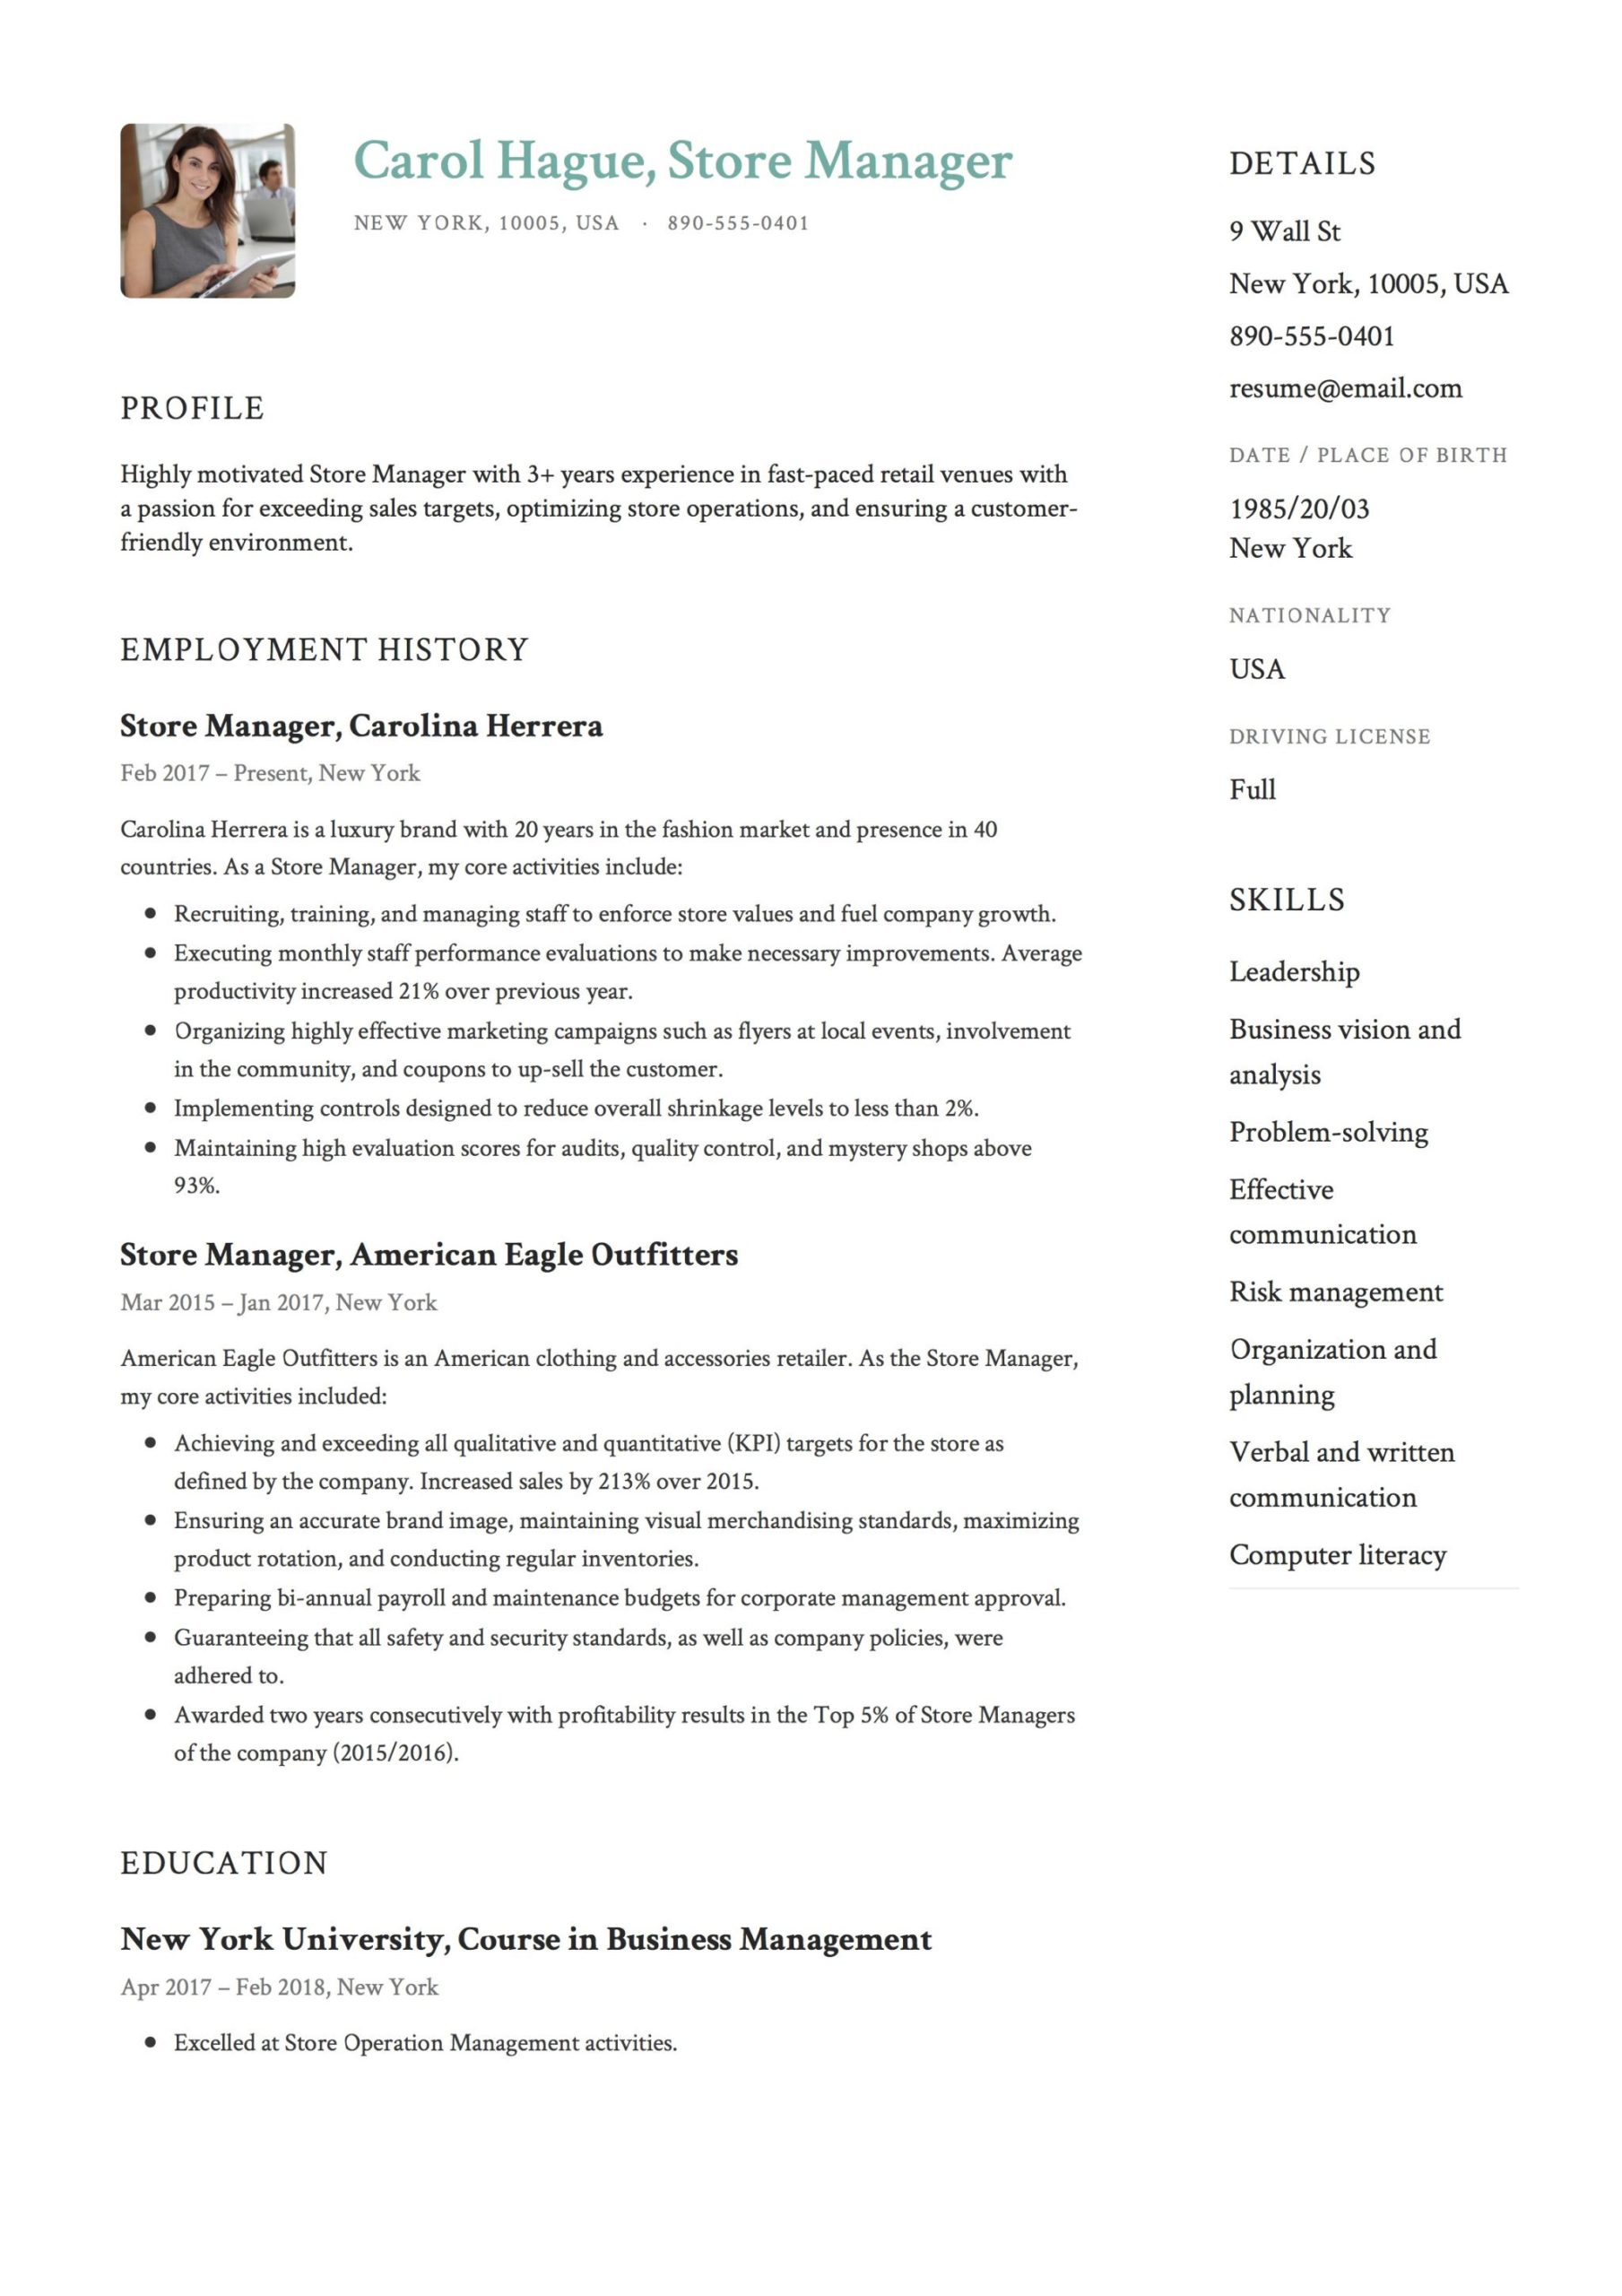 Sample Resume Department Store Sales Professional Store Manager Resume & Guide 12 Templates Pdf 2021